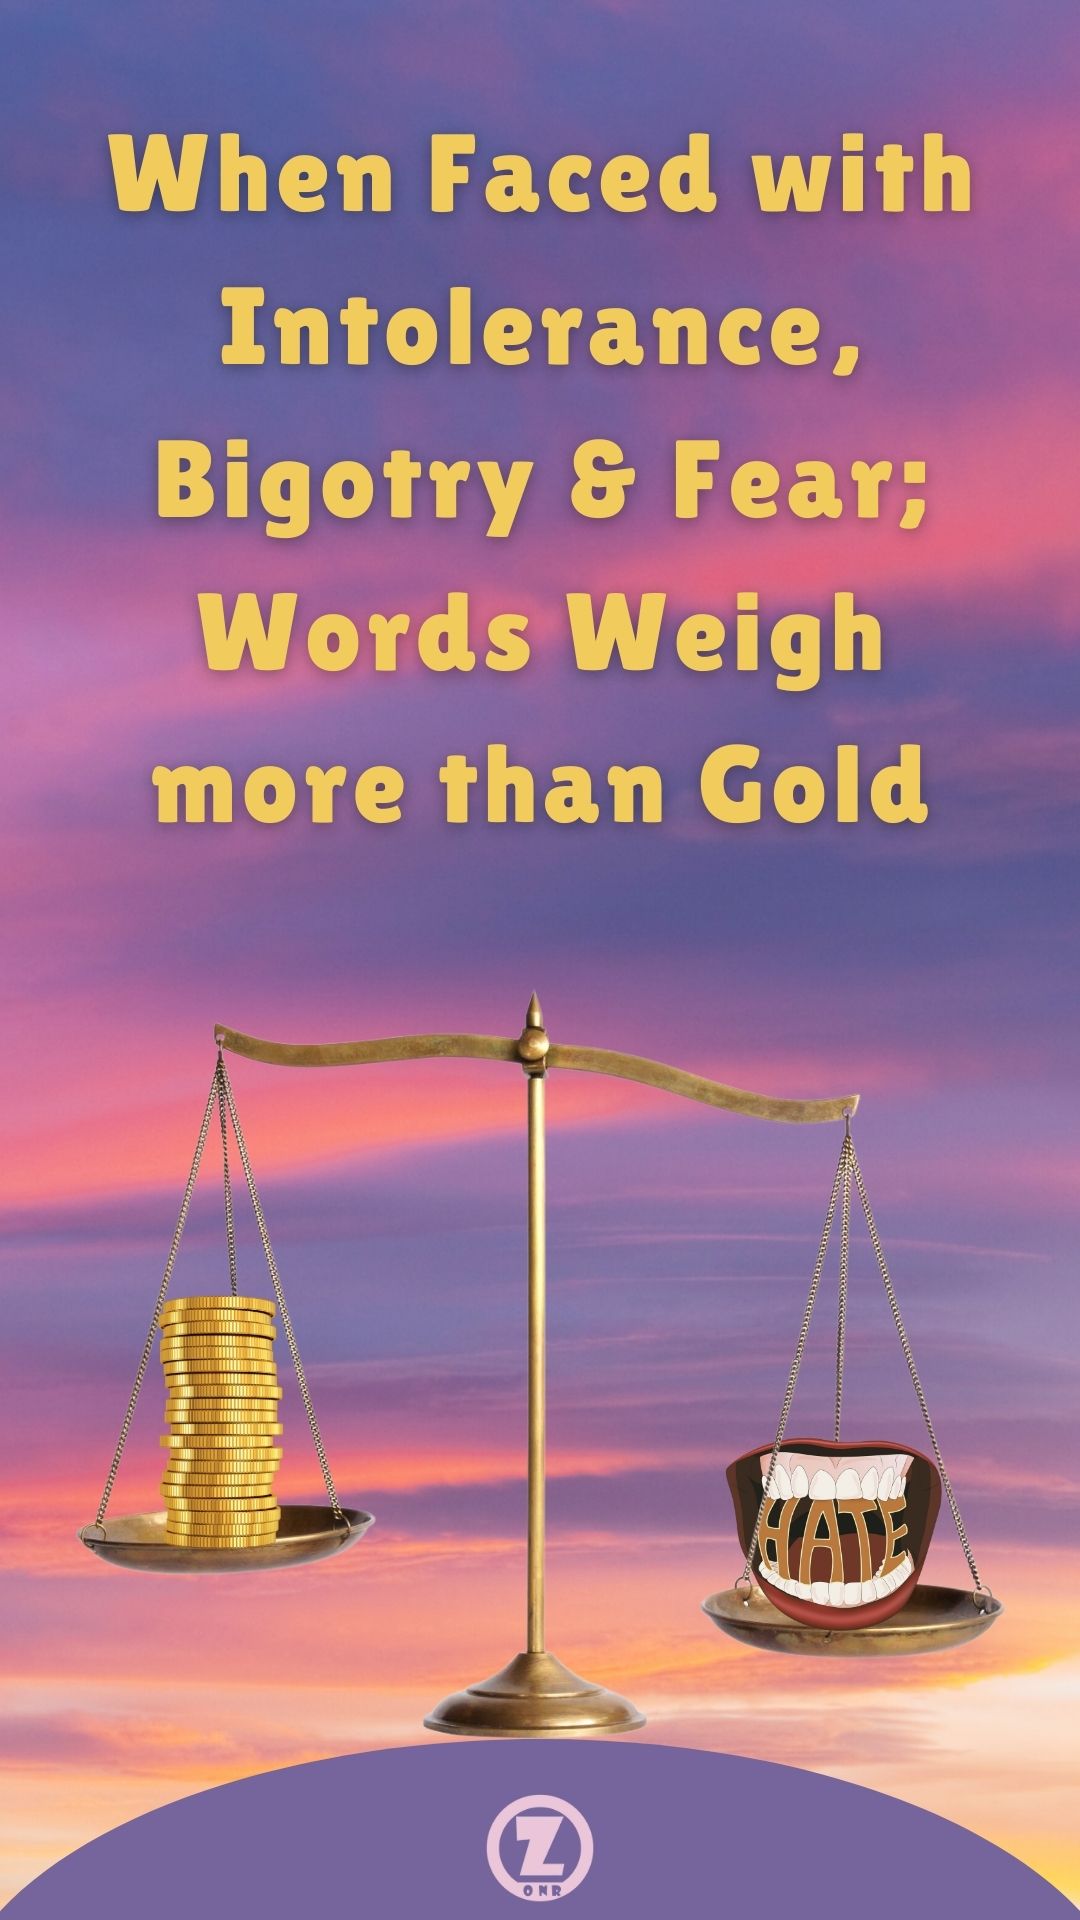 You are currently viewing When Faced with Intolerance, Bigotry & Fear; Words Weigh more than Gold – Step 10